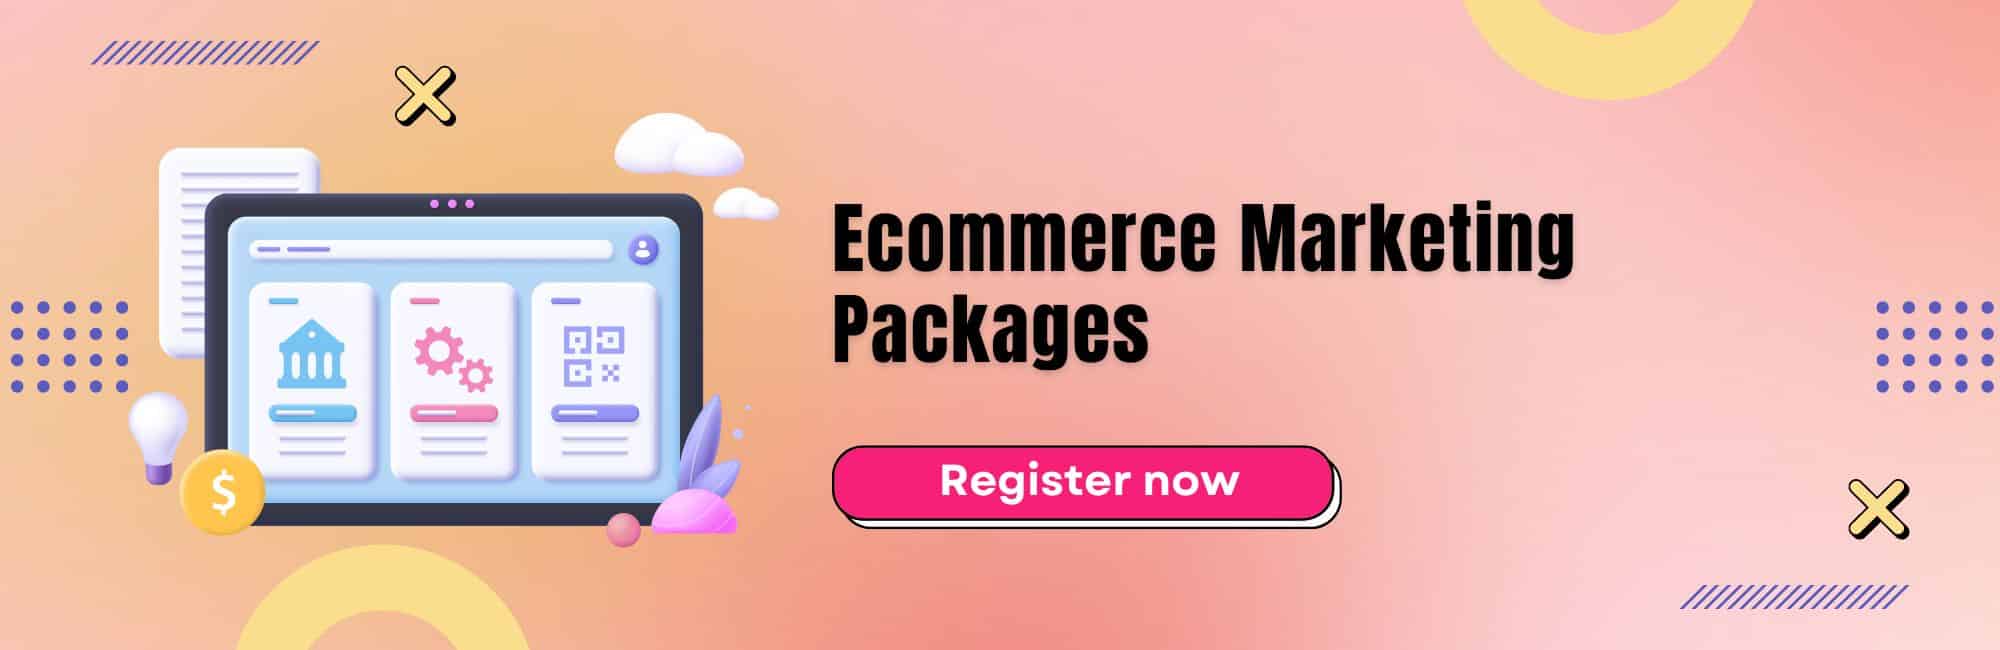 Ecommerce Marketing Packages